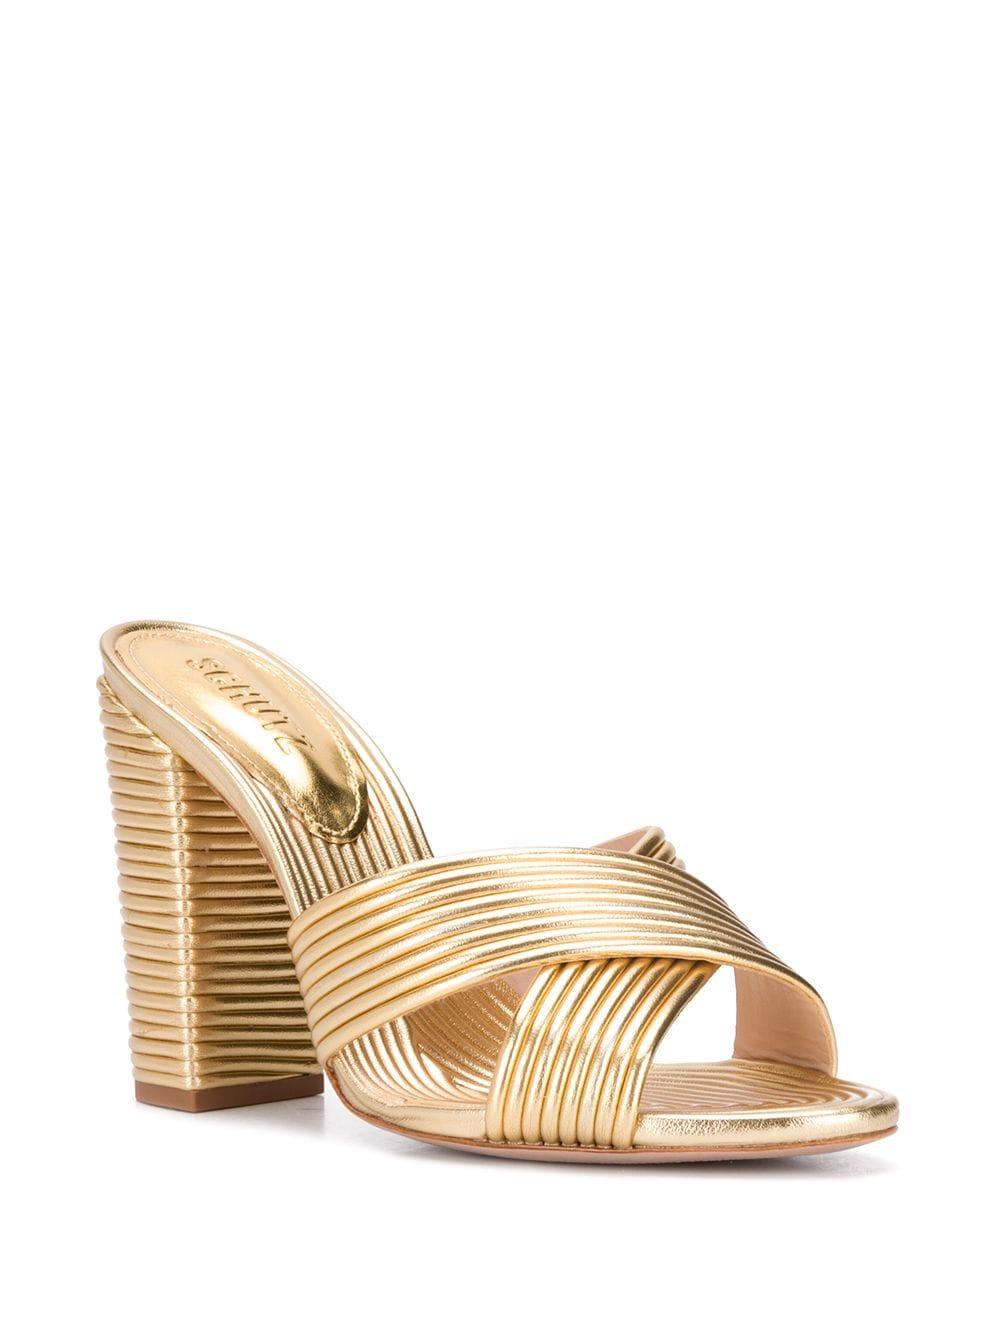 Schutz Ribbed Backless Mules in Gold (Metallic) | Lyst